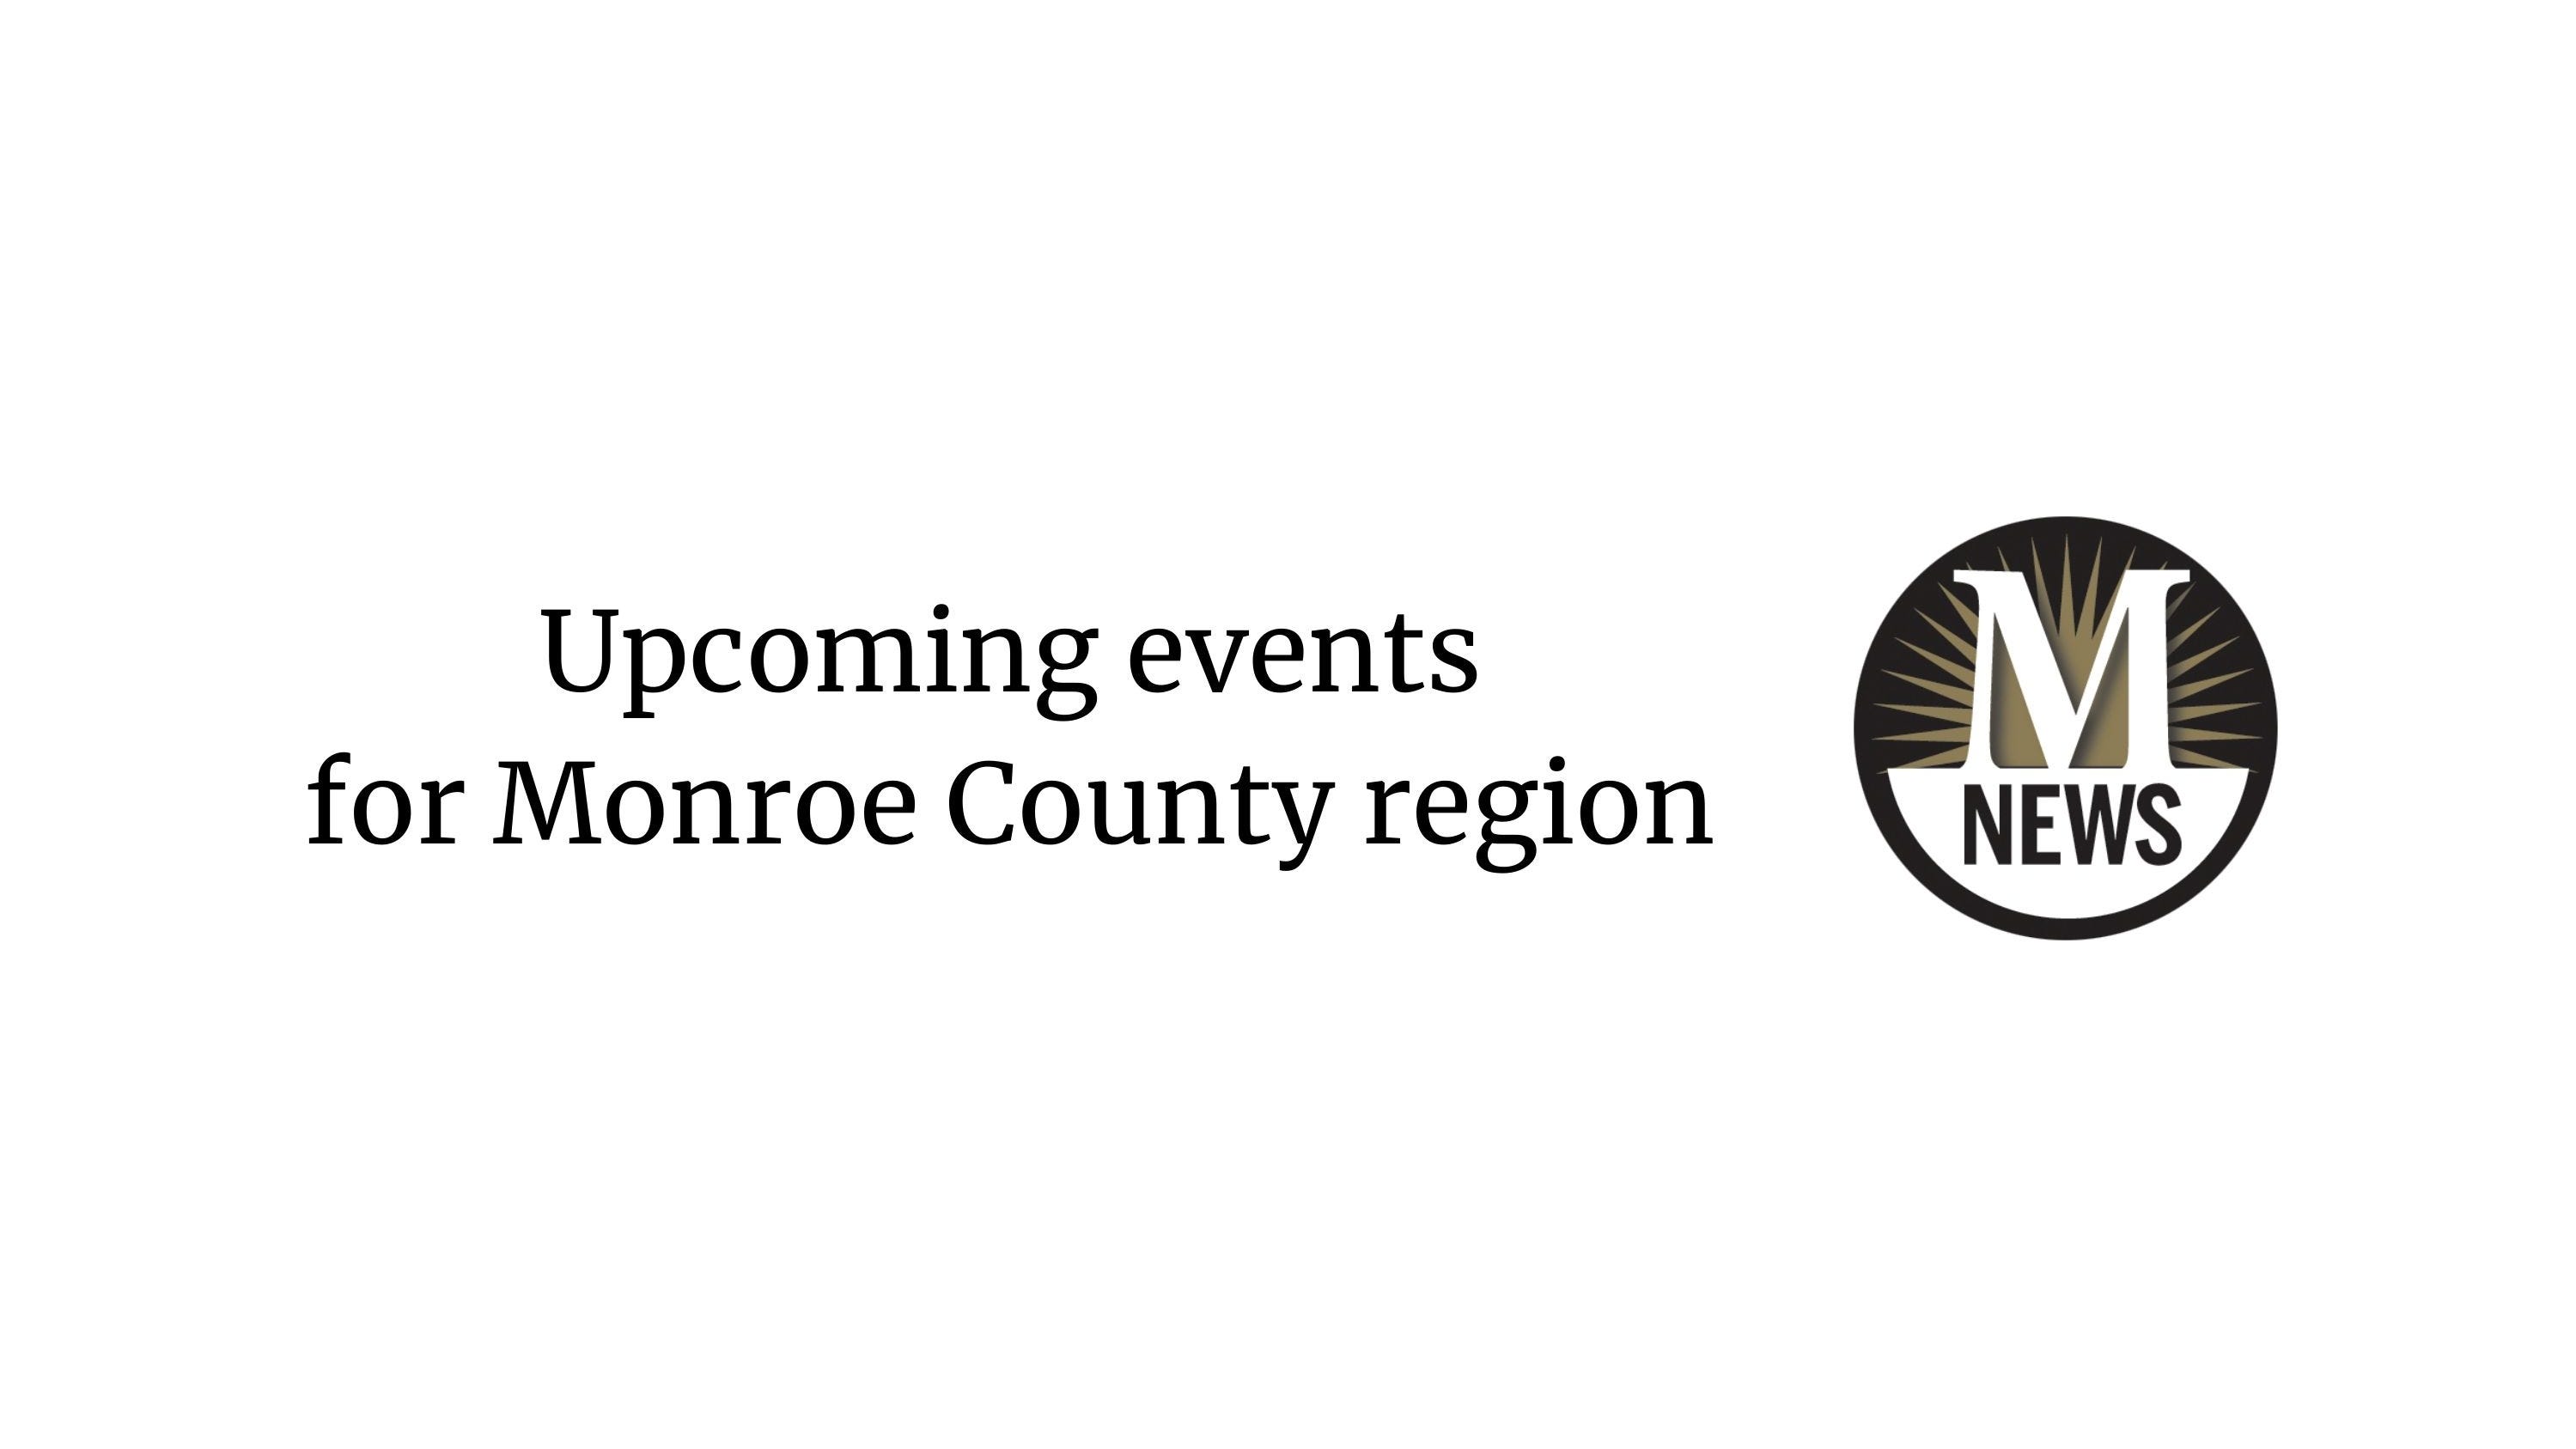 events for Monroe County area